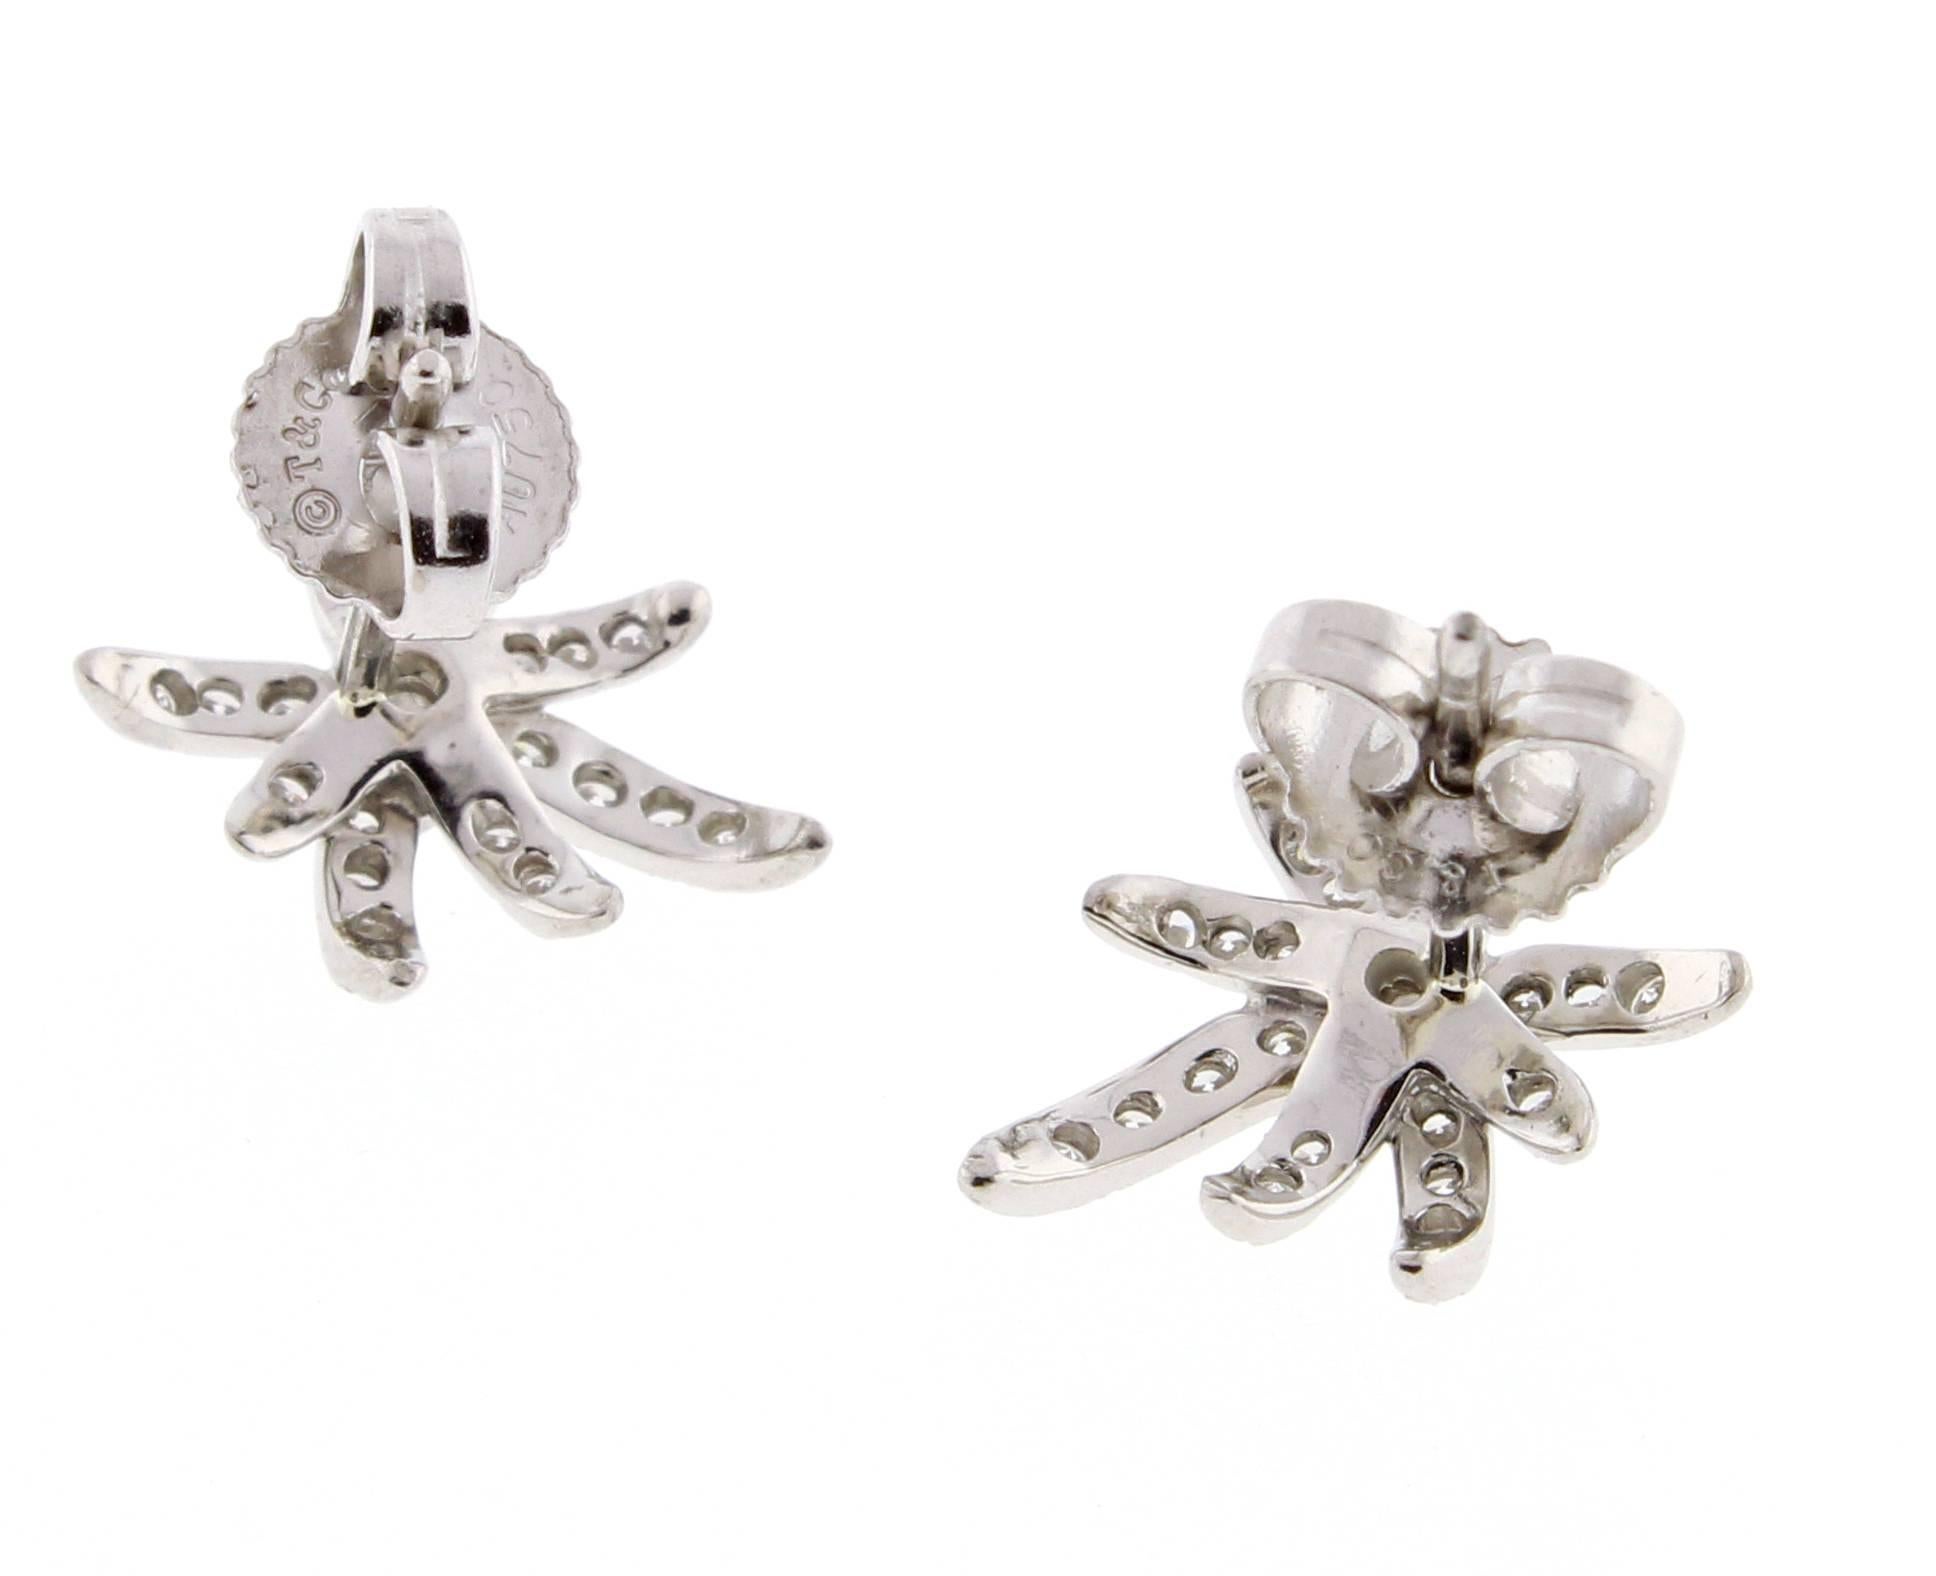 These dazzling earrings feature of burst of fiery diamonds. 42 brilliant diamonds weigh .28 carats, Set in platinum